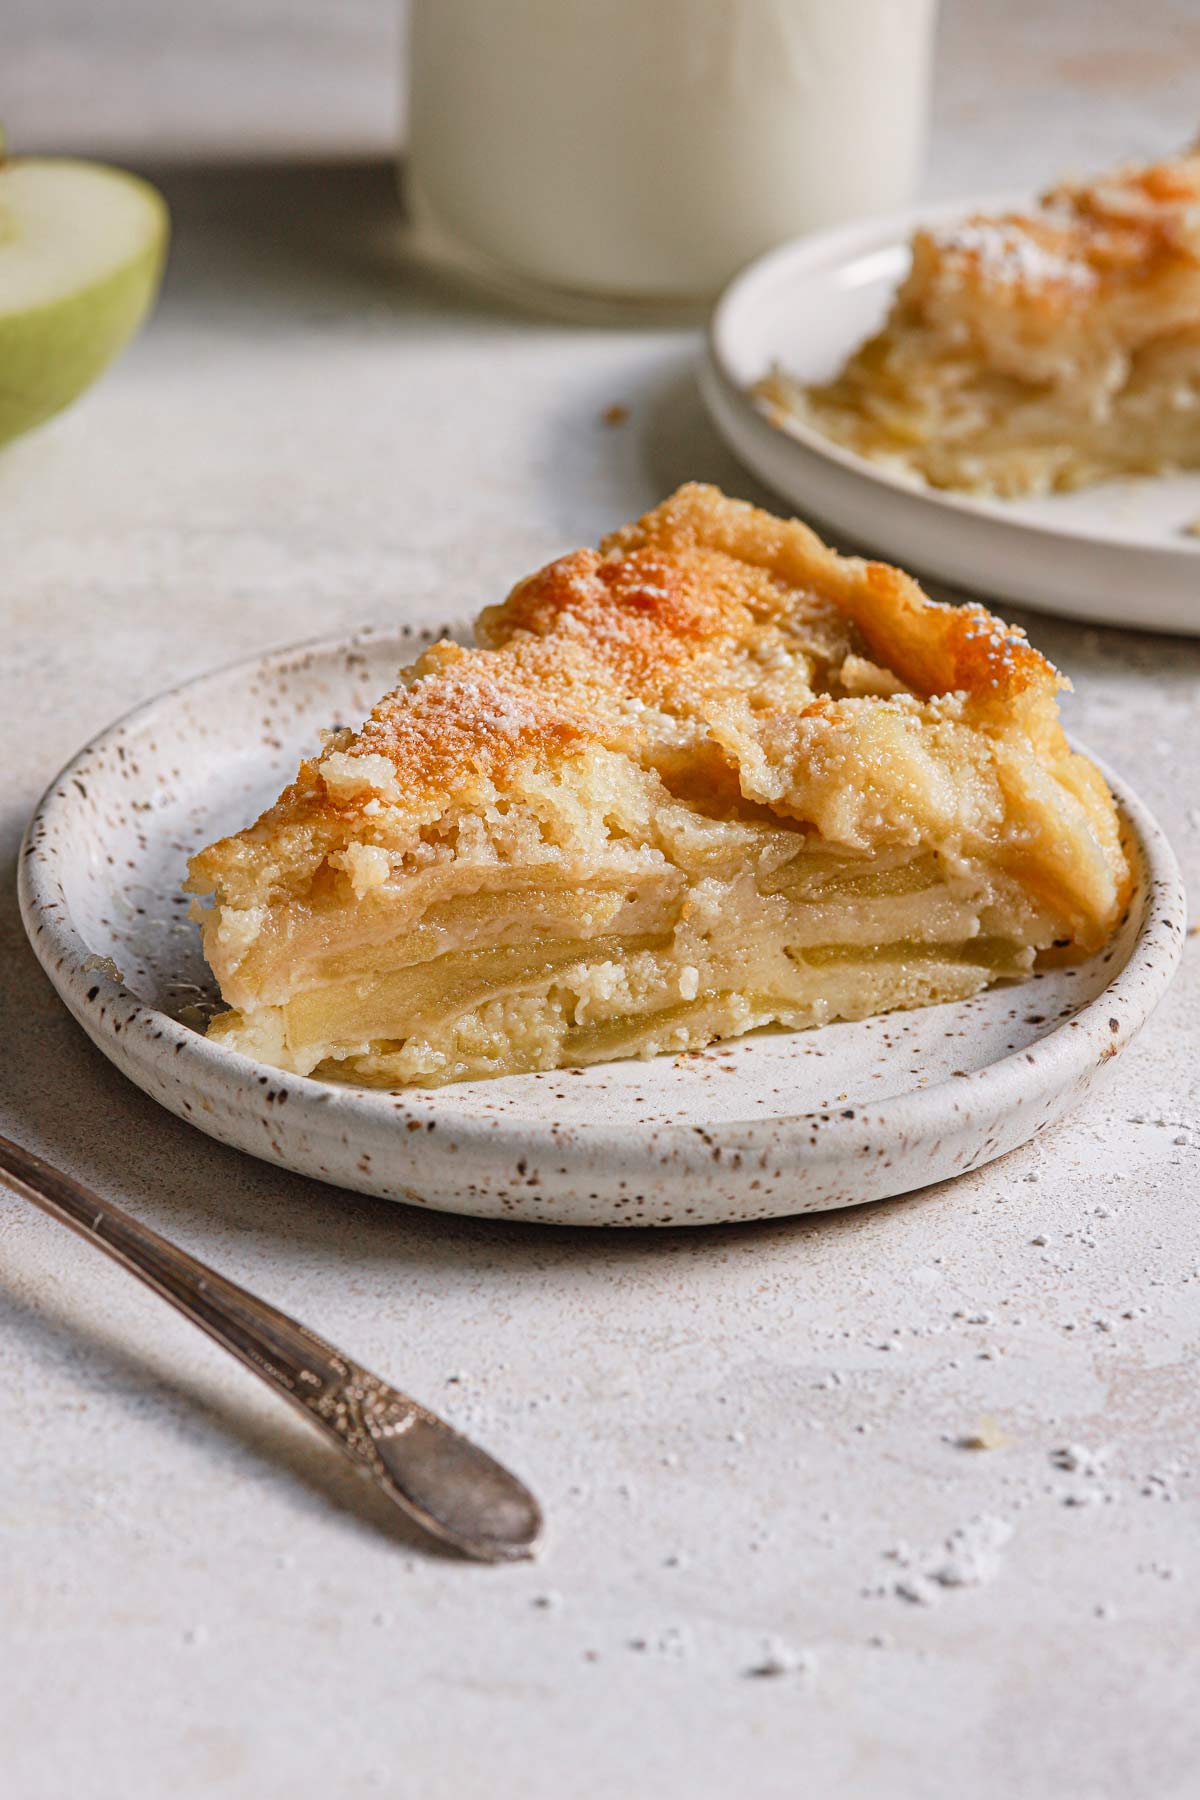 A slice of apple cake on a speckled plate with pieces of a fork and apple in the background.